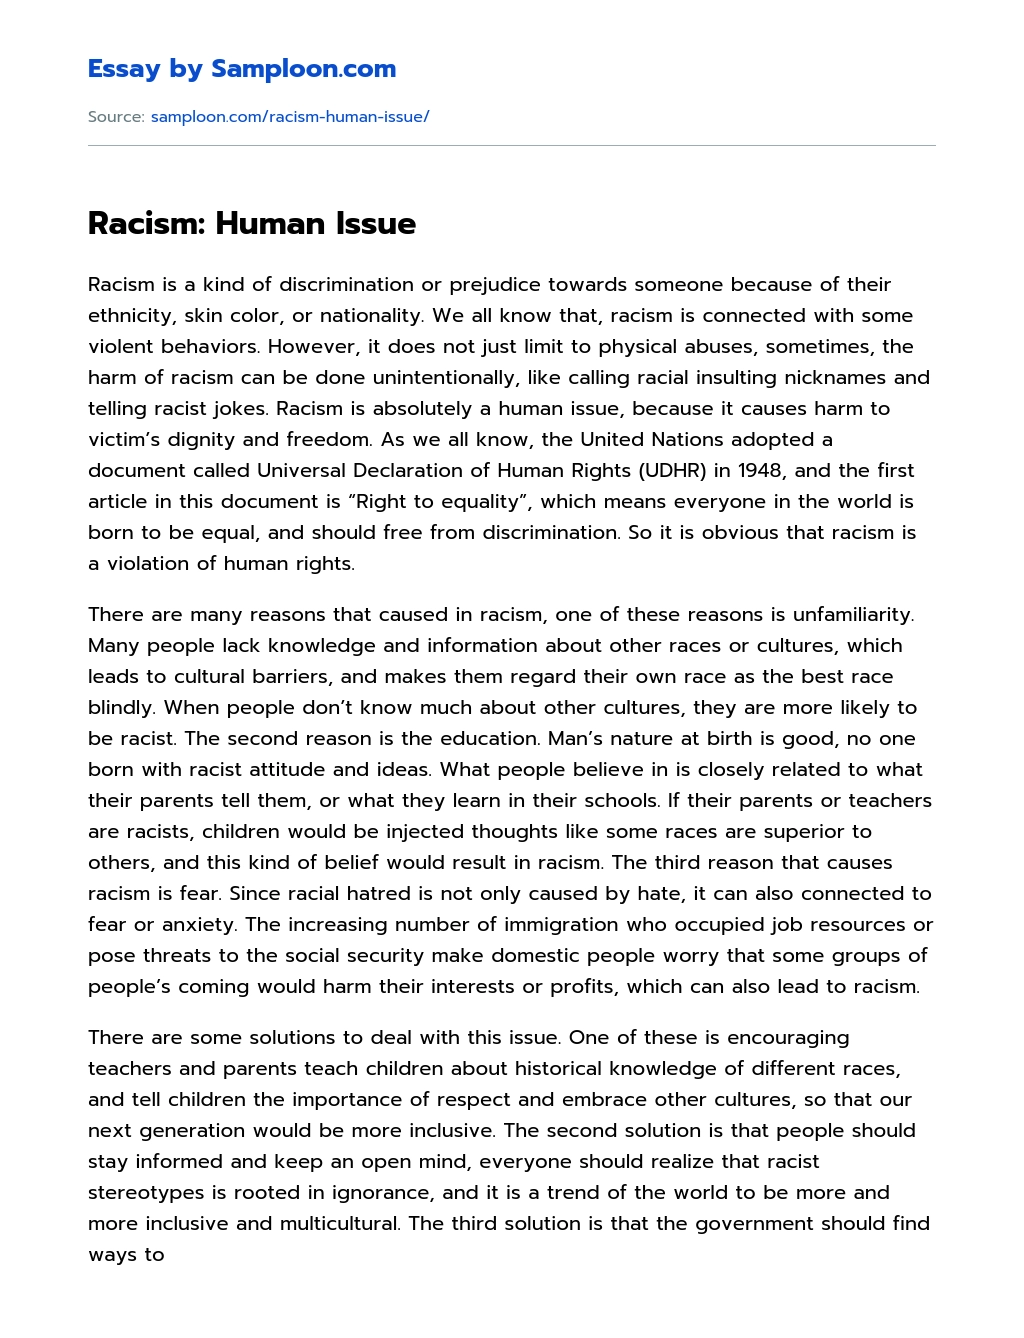 Racism: Human Issue essay